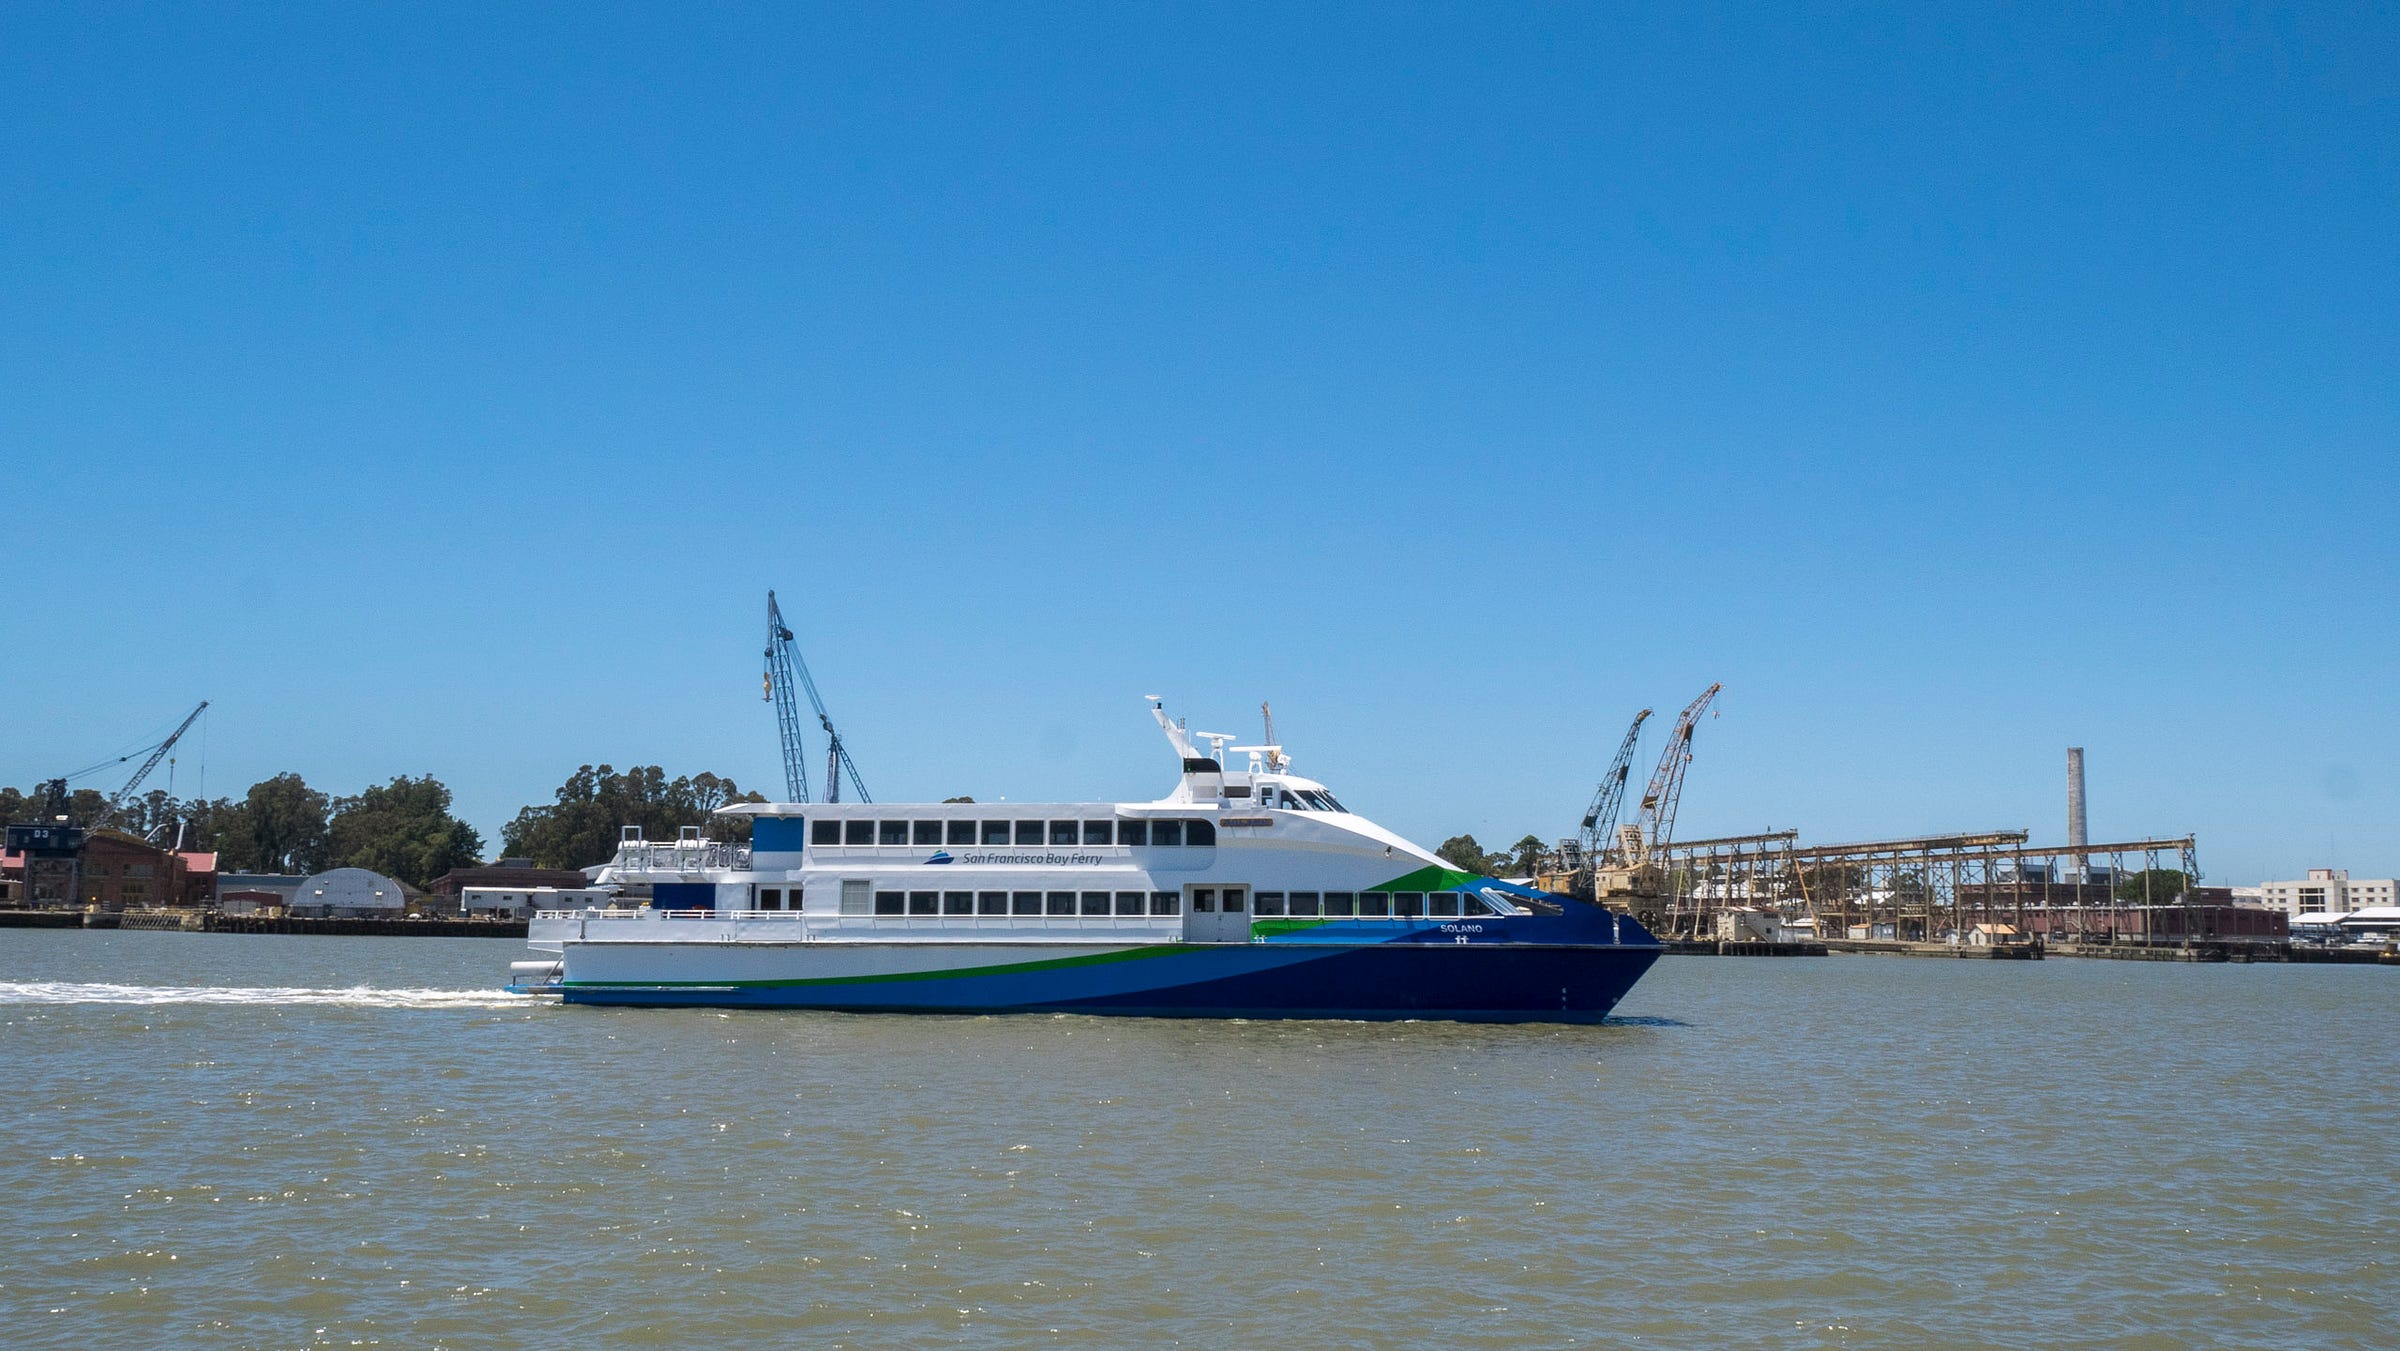 A double-deck modern passenger ferry (white with blue and green streaks rising from the tail to the bow) pulls into the ferry terminal at Vallejo, California. Shipping cranes rise in the background.